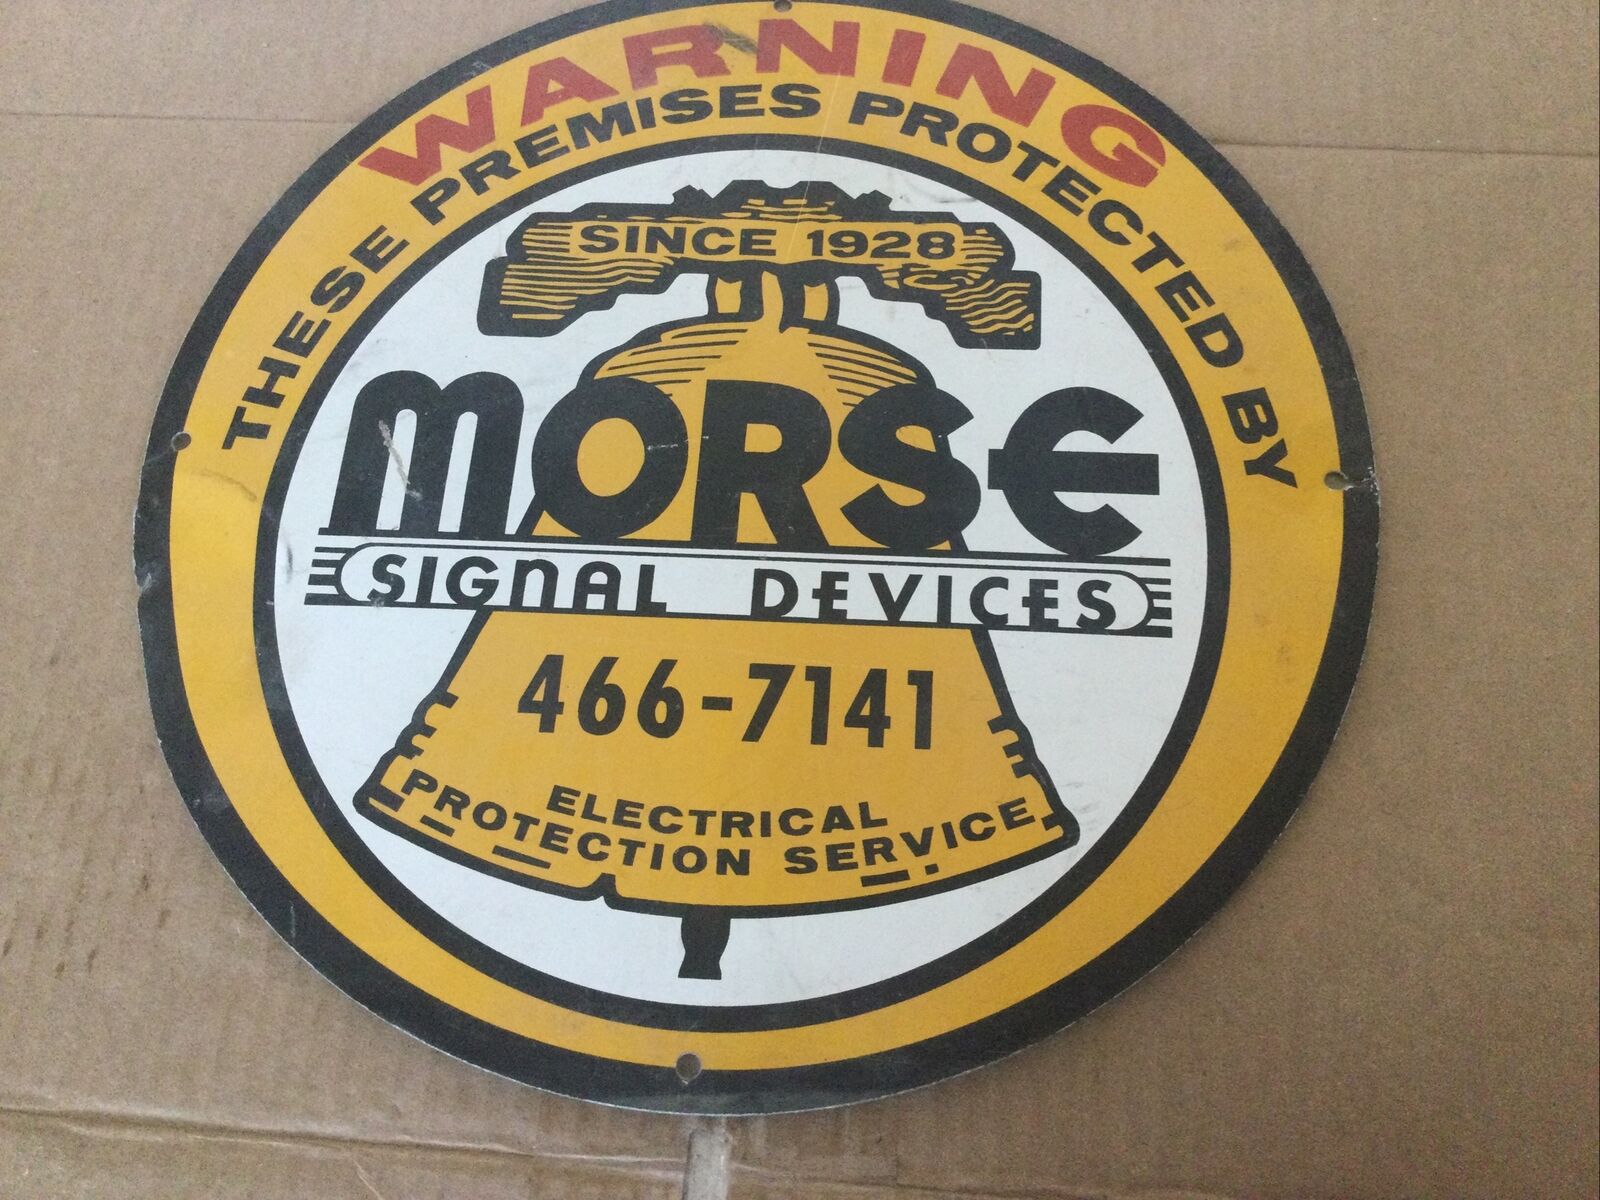 Vintage Morse Signal Devices Security Sign. 1928.